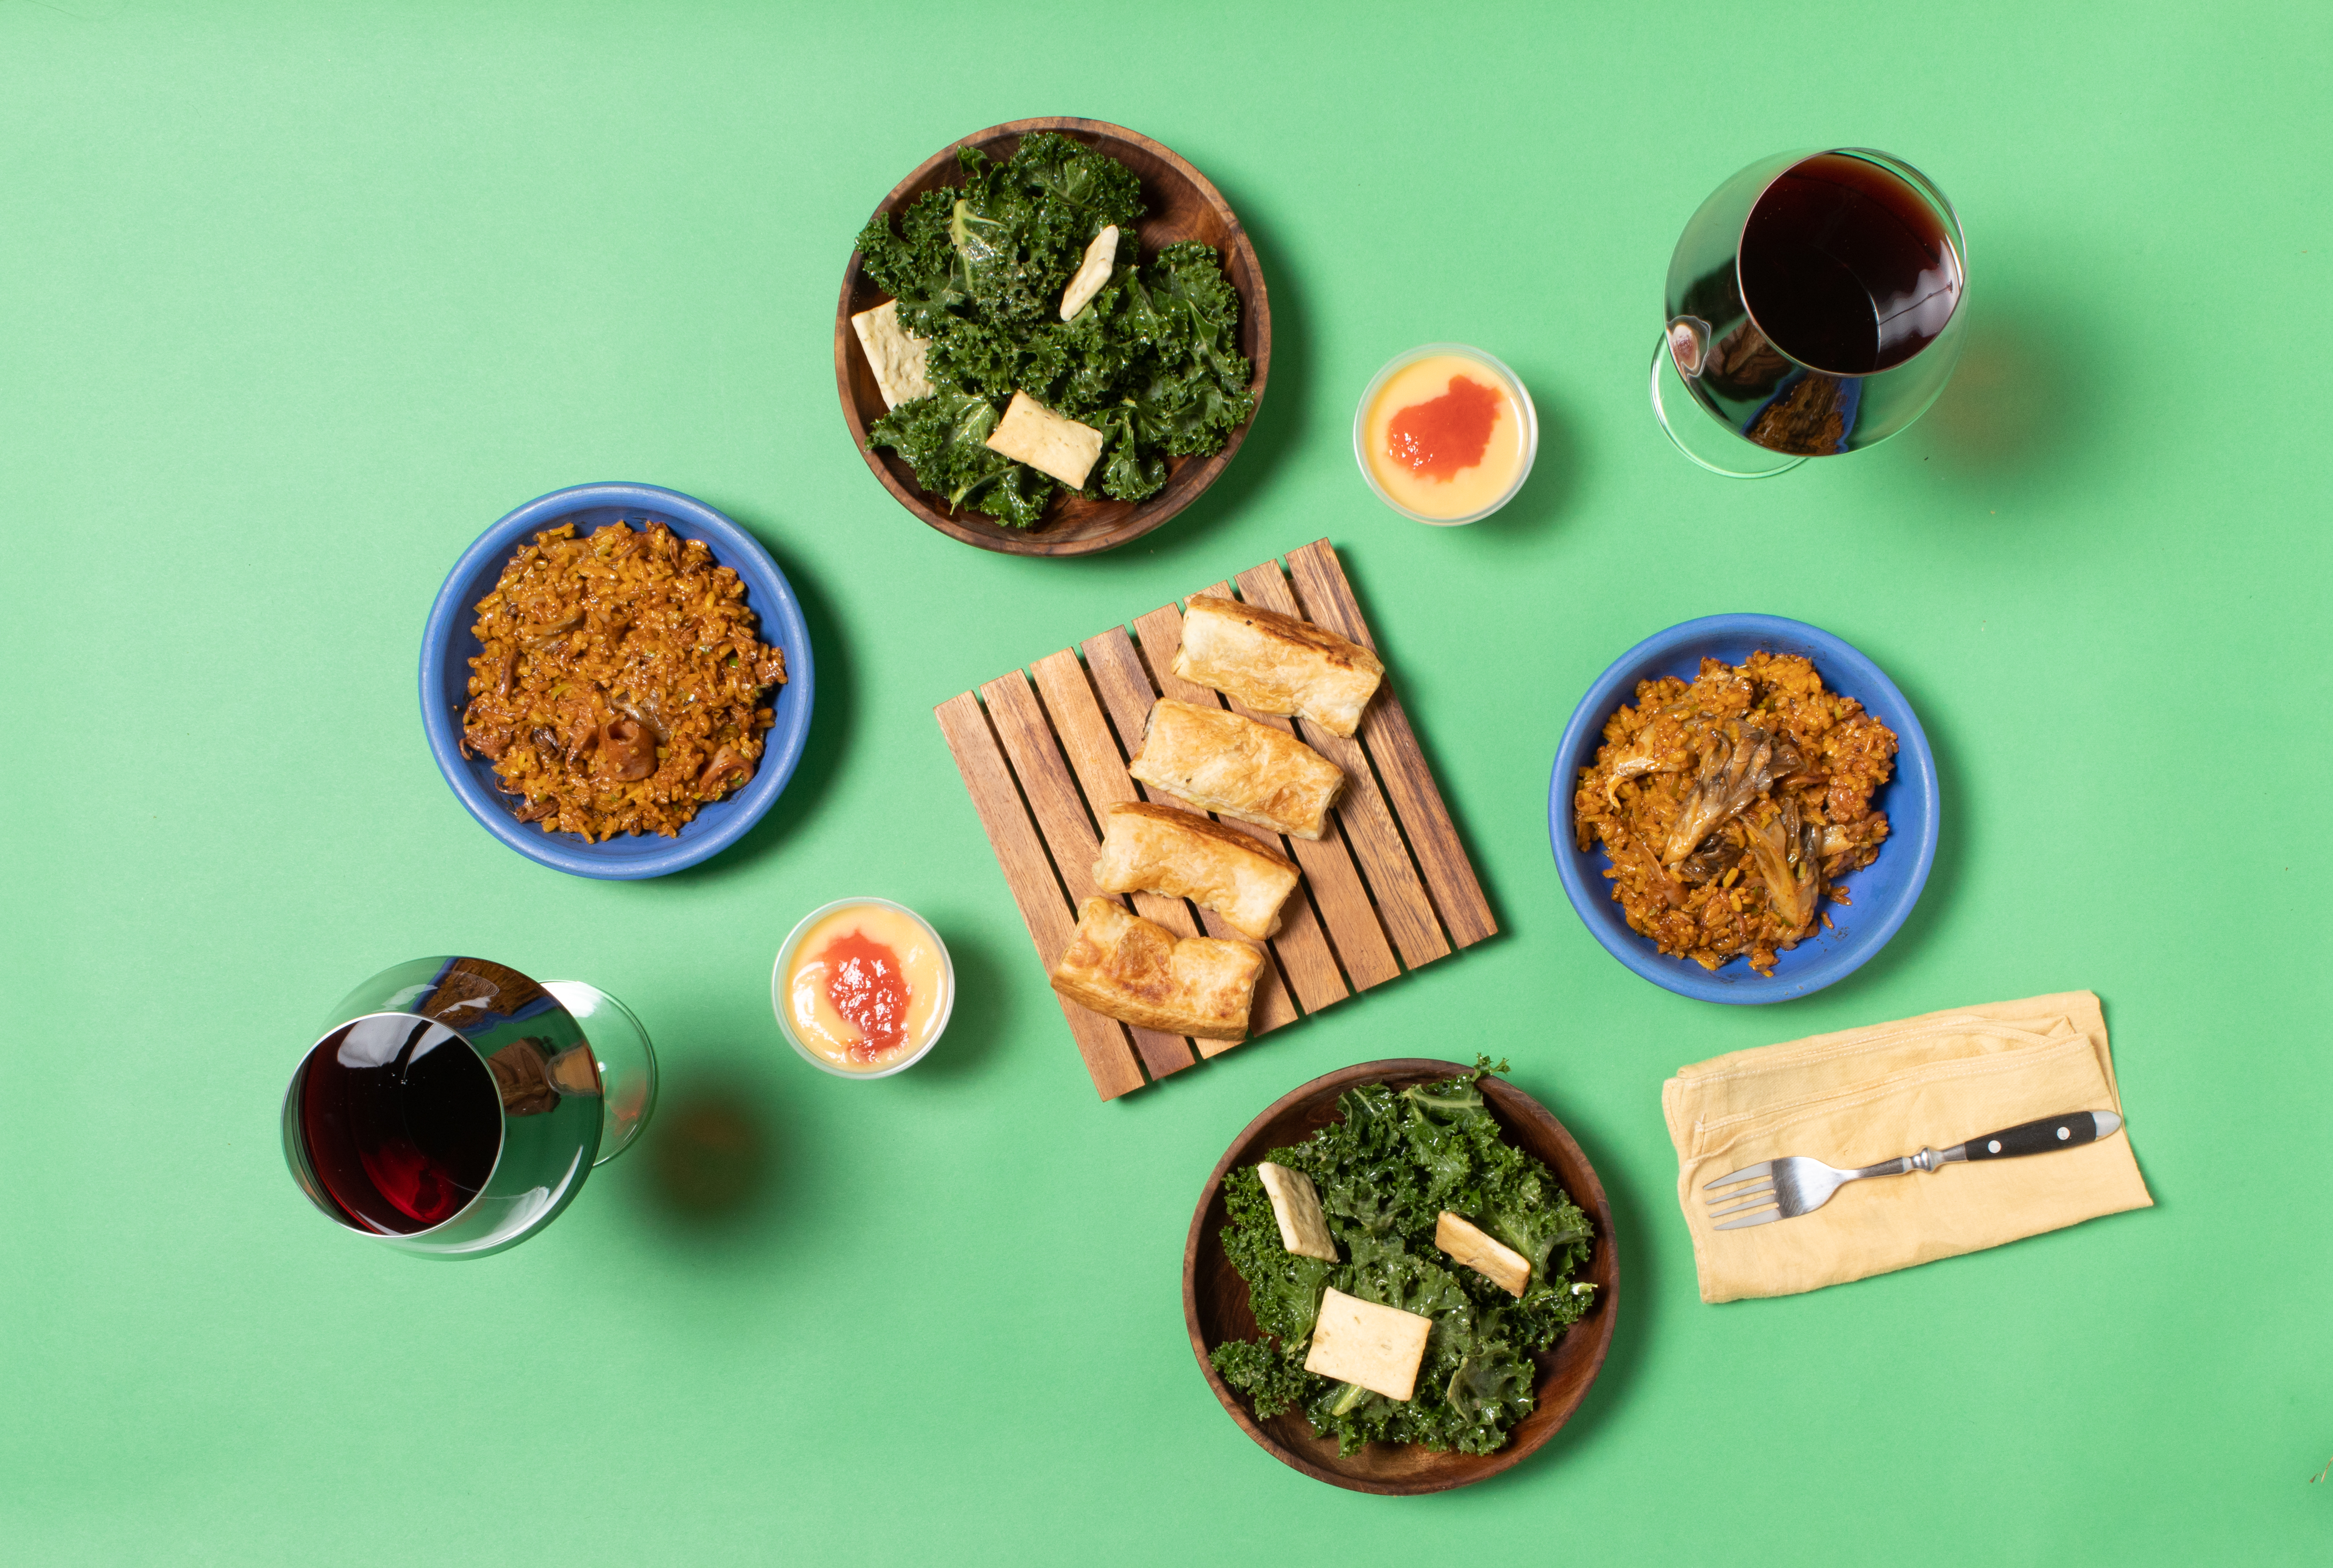 Top-down view of bowls of paella, glasses of red wine, and kale salad against a green background